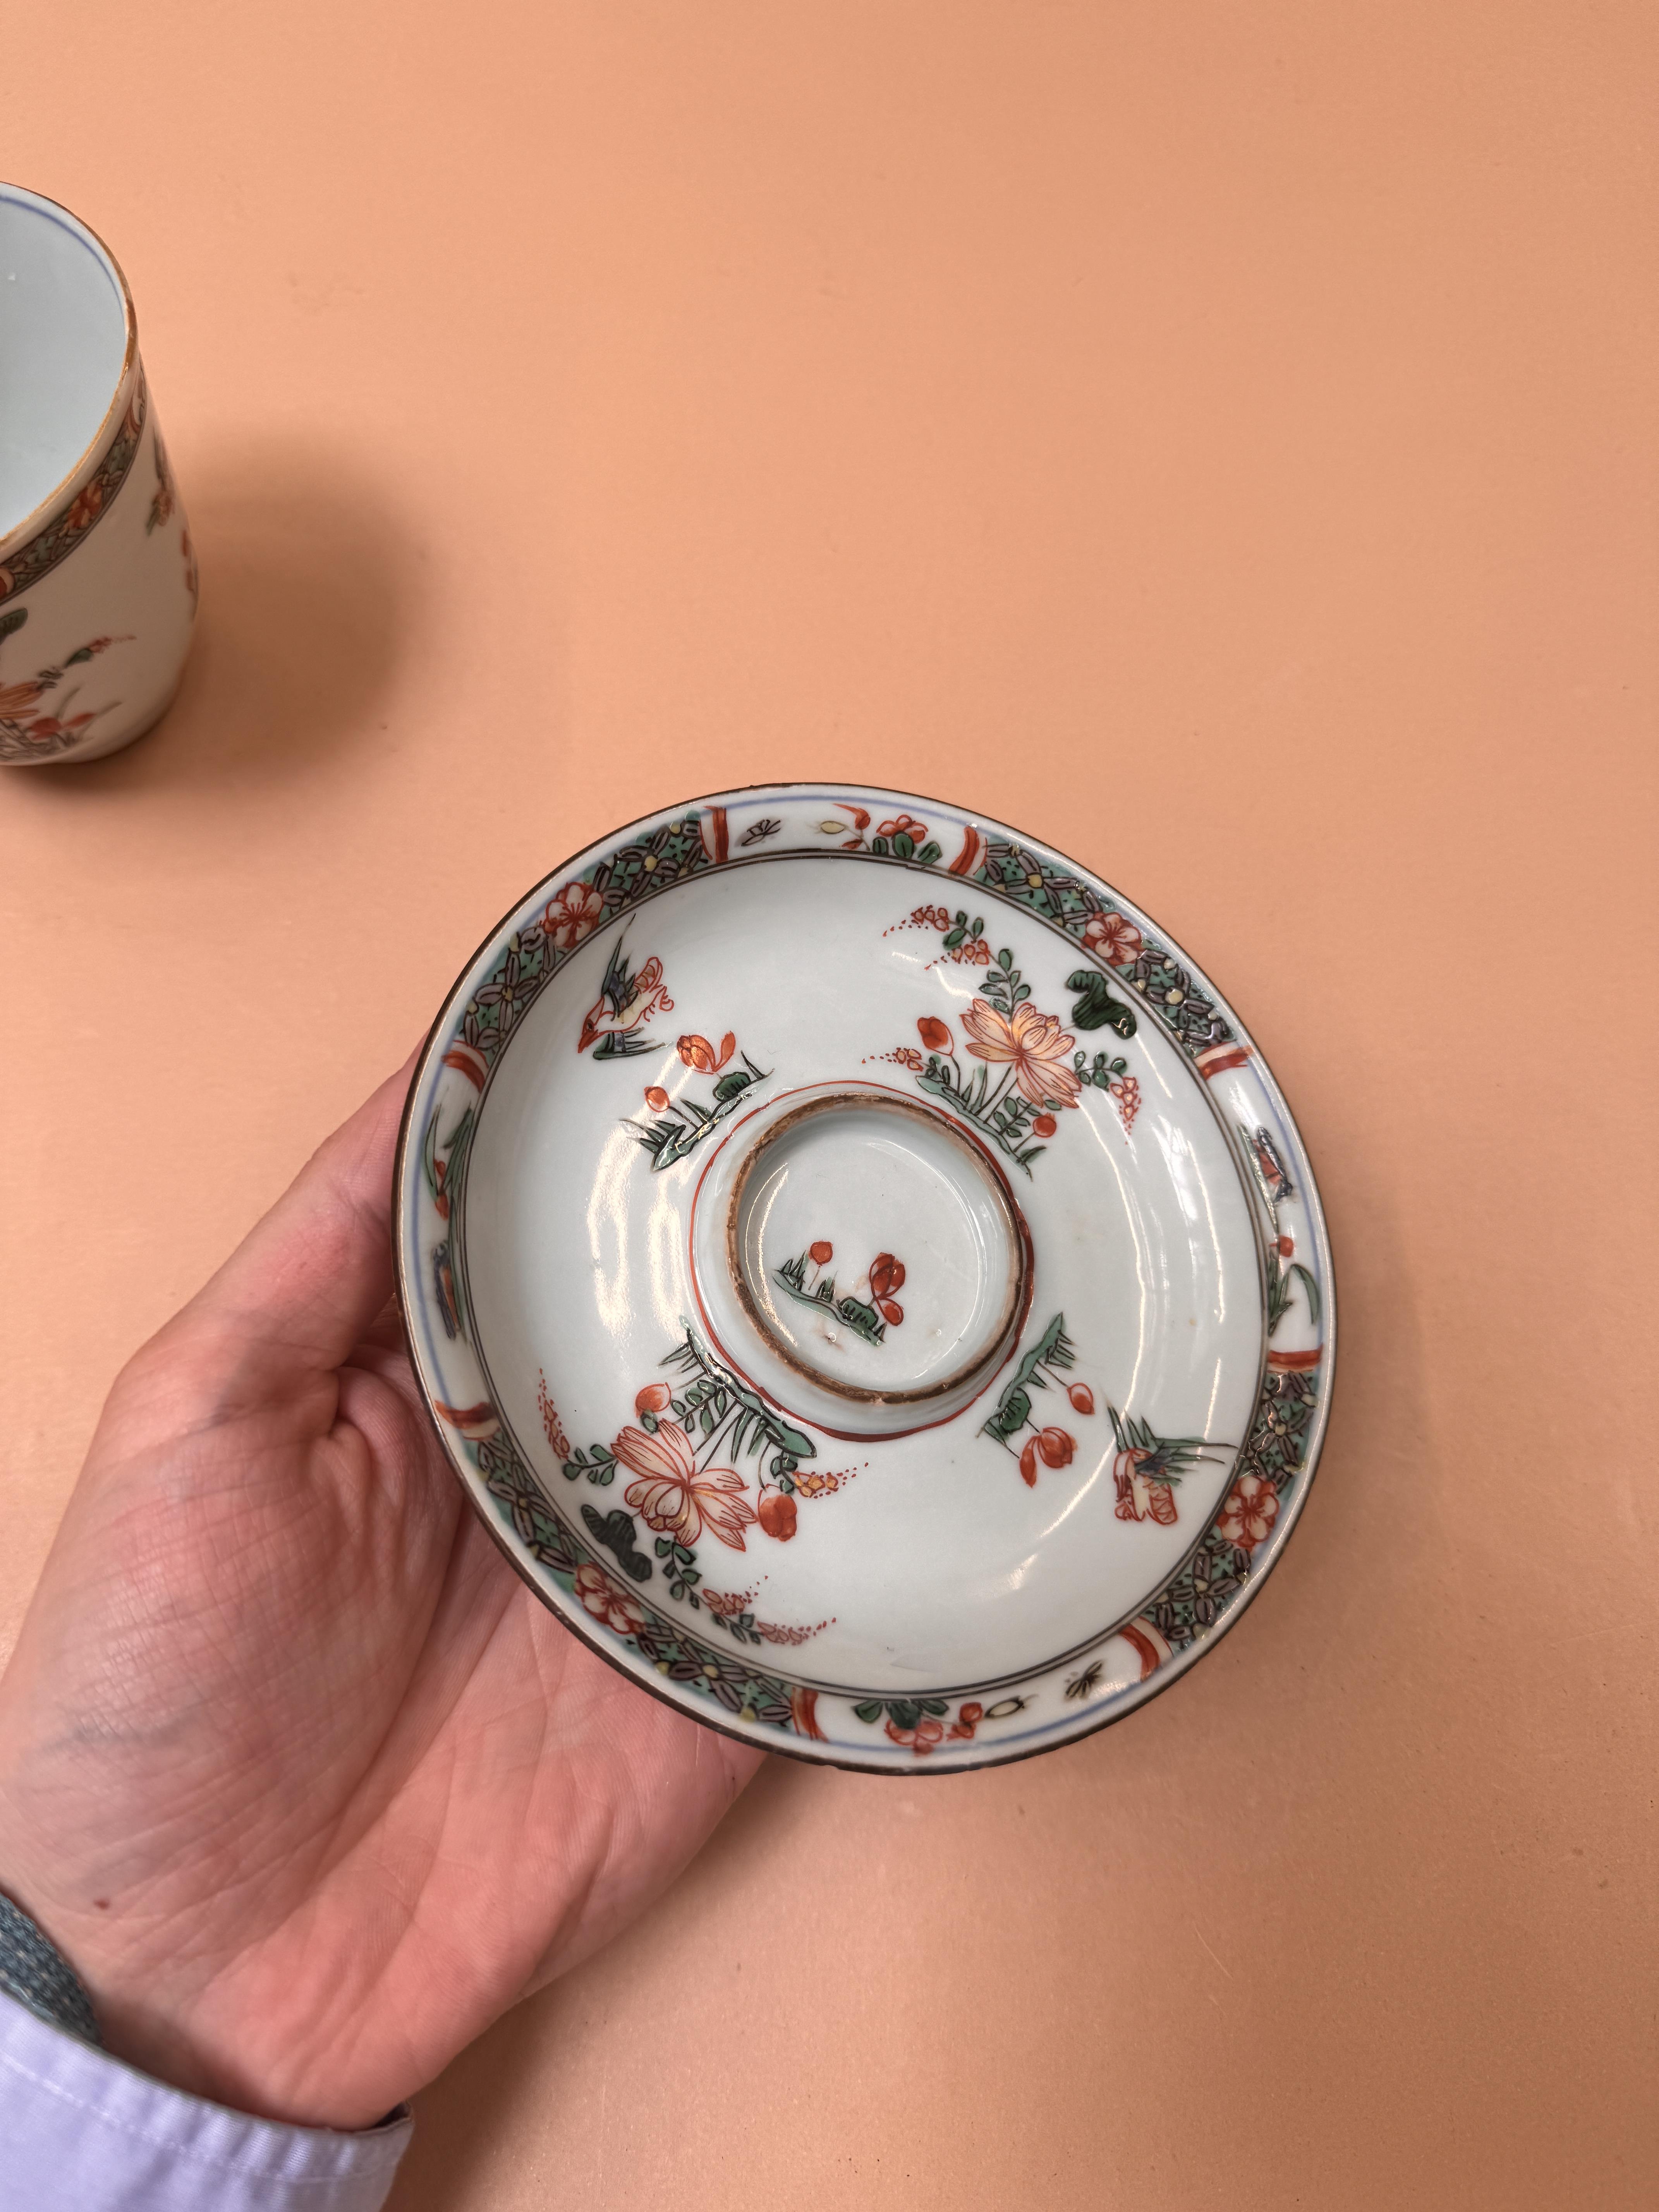 A CHINESE FAMILLE-VERTE CUP AND SAUCER 清康熙 五彩花鳥圖盃連盤 - Image 12 of 18